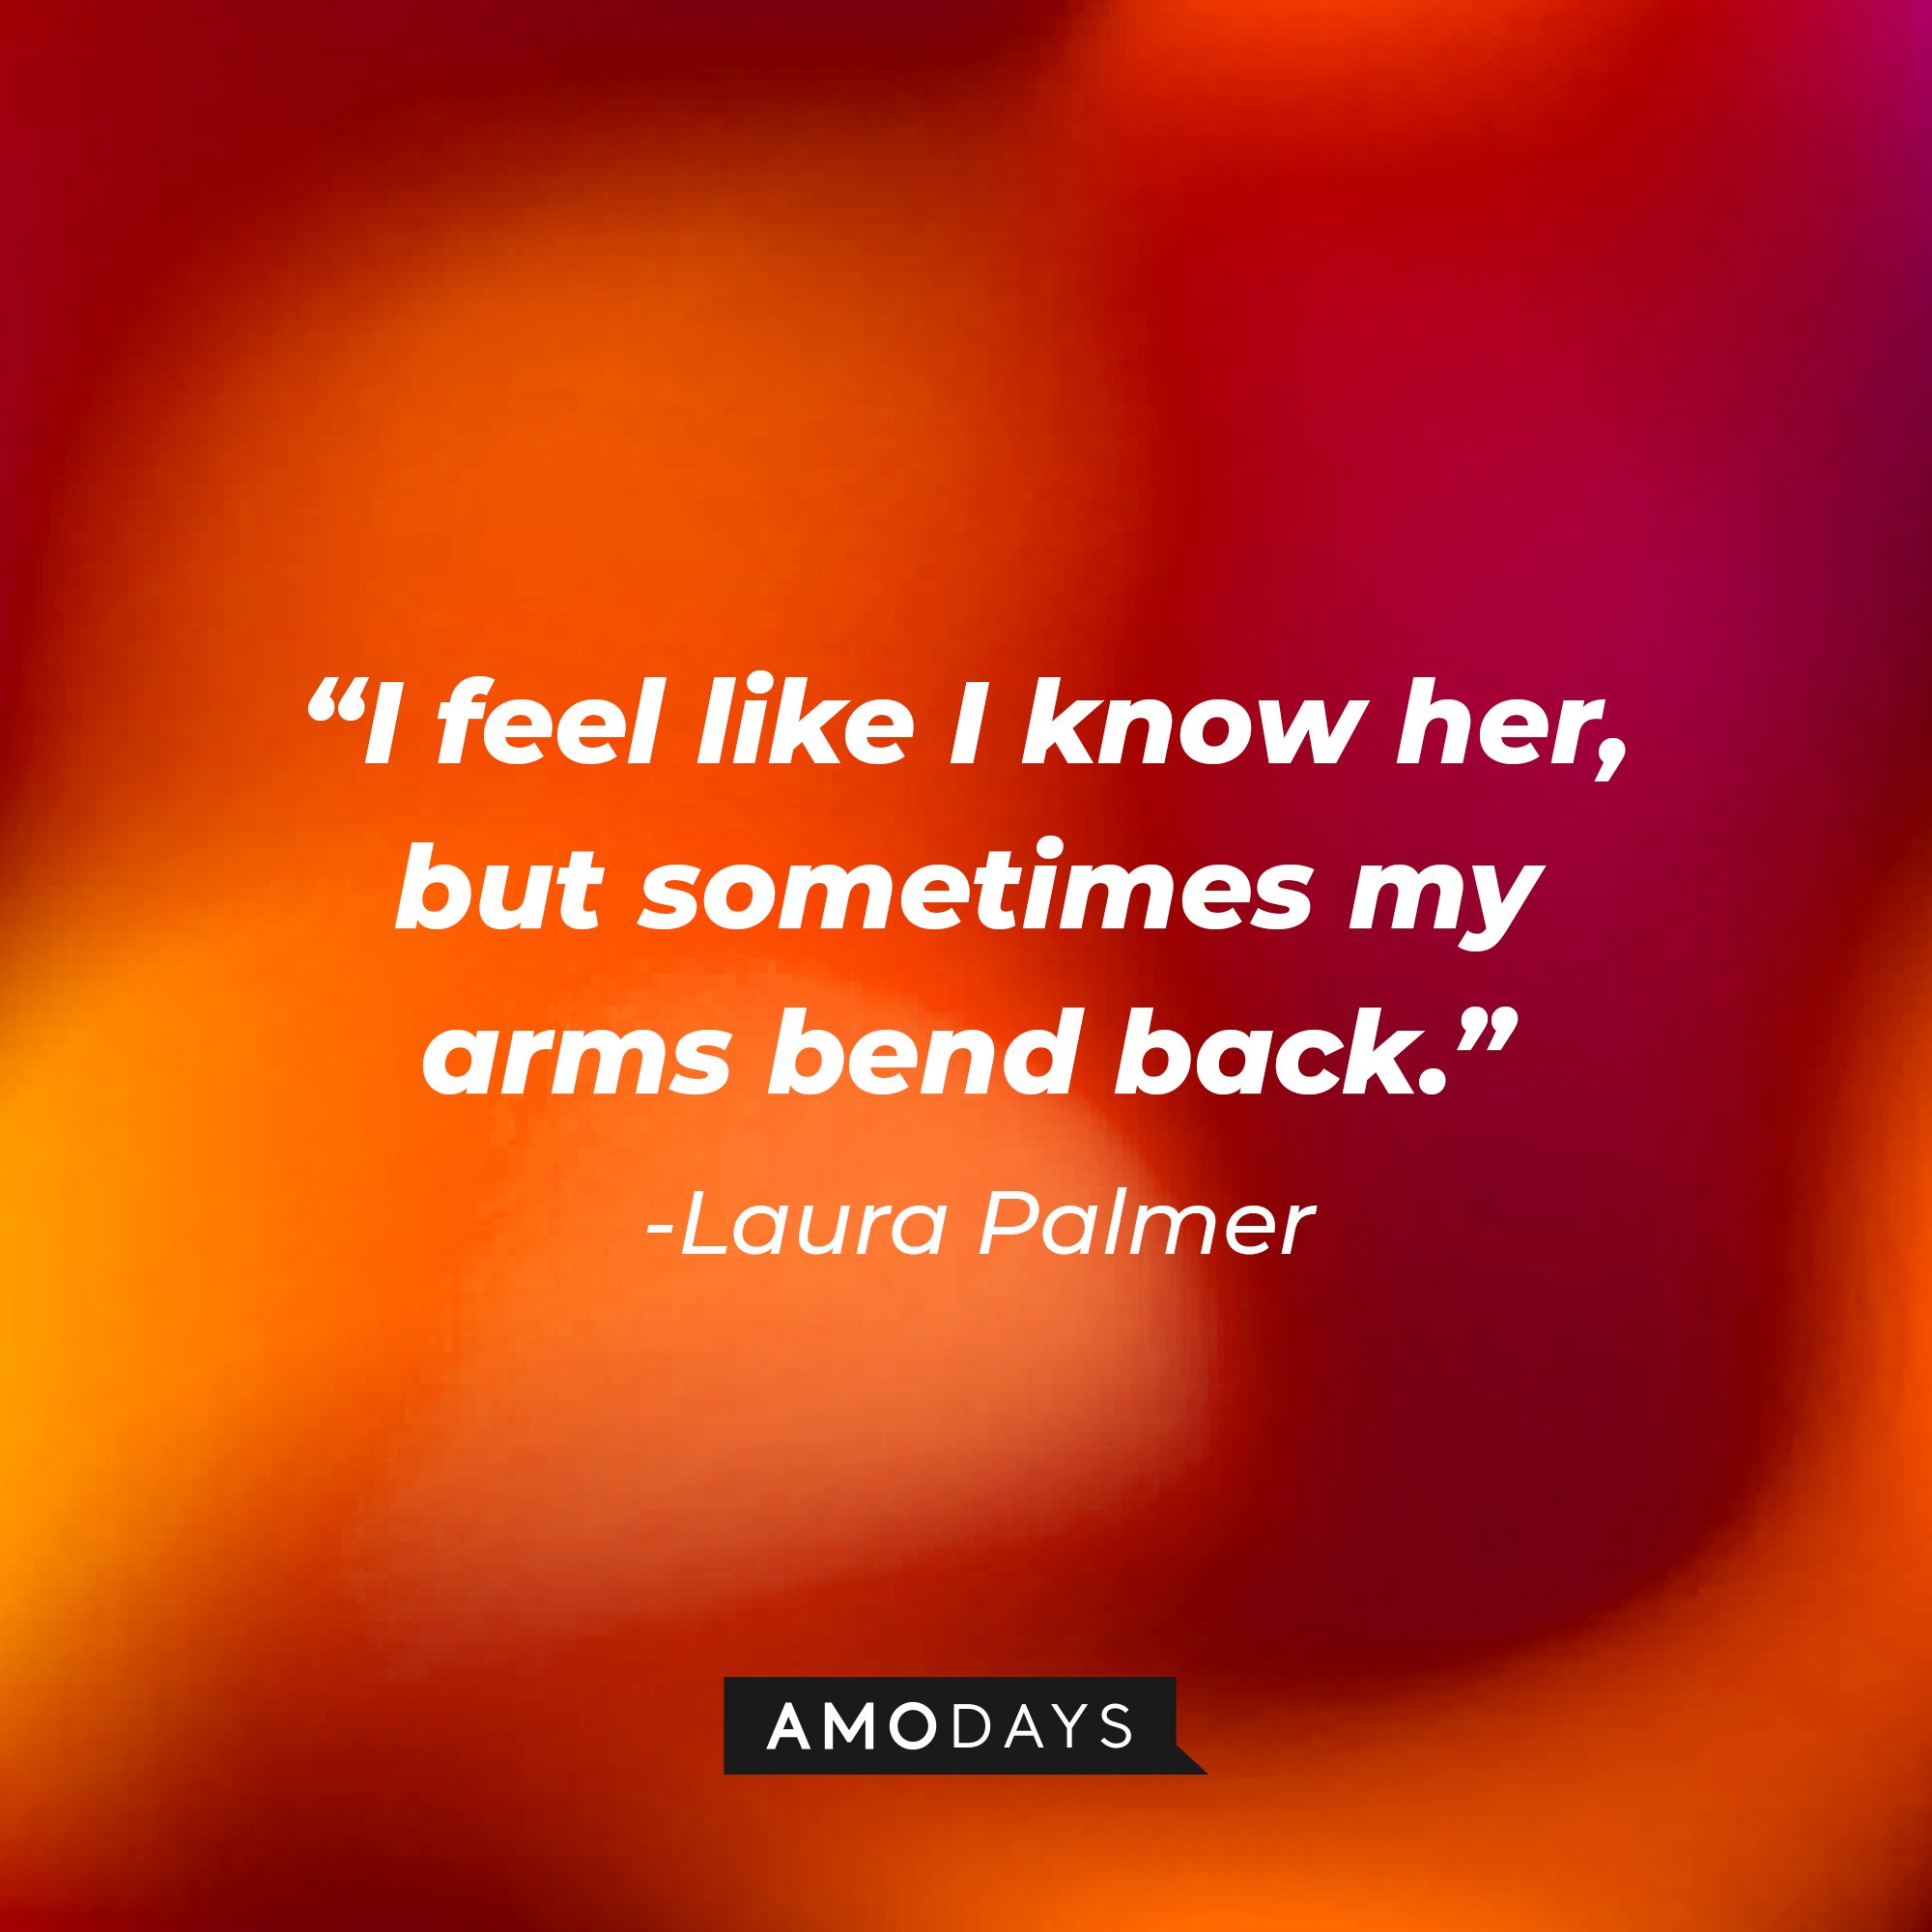   Laura Palmer's quote: "I feel like I know her, but sometimes my arms bend back." | Image: AmoDays